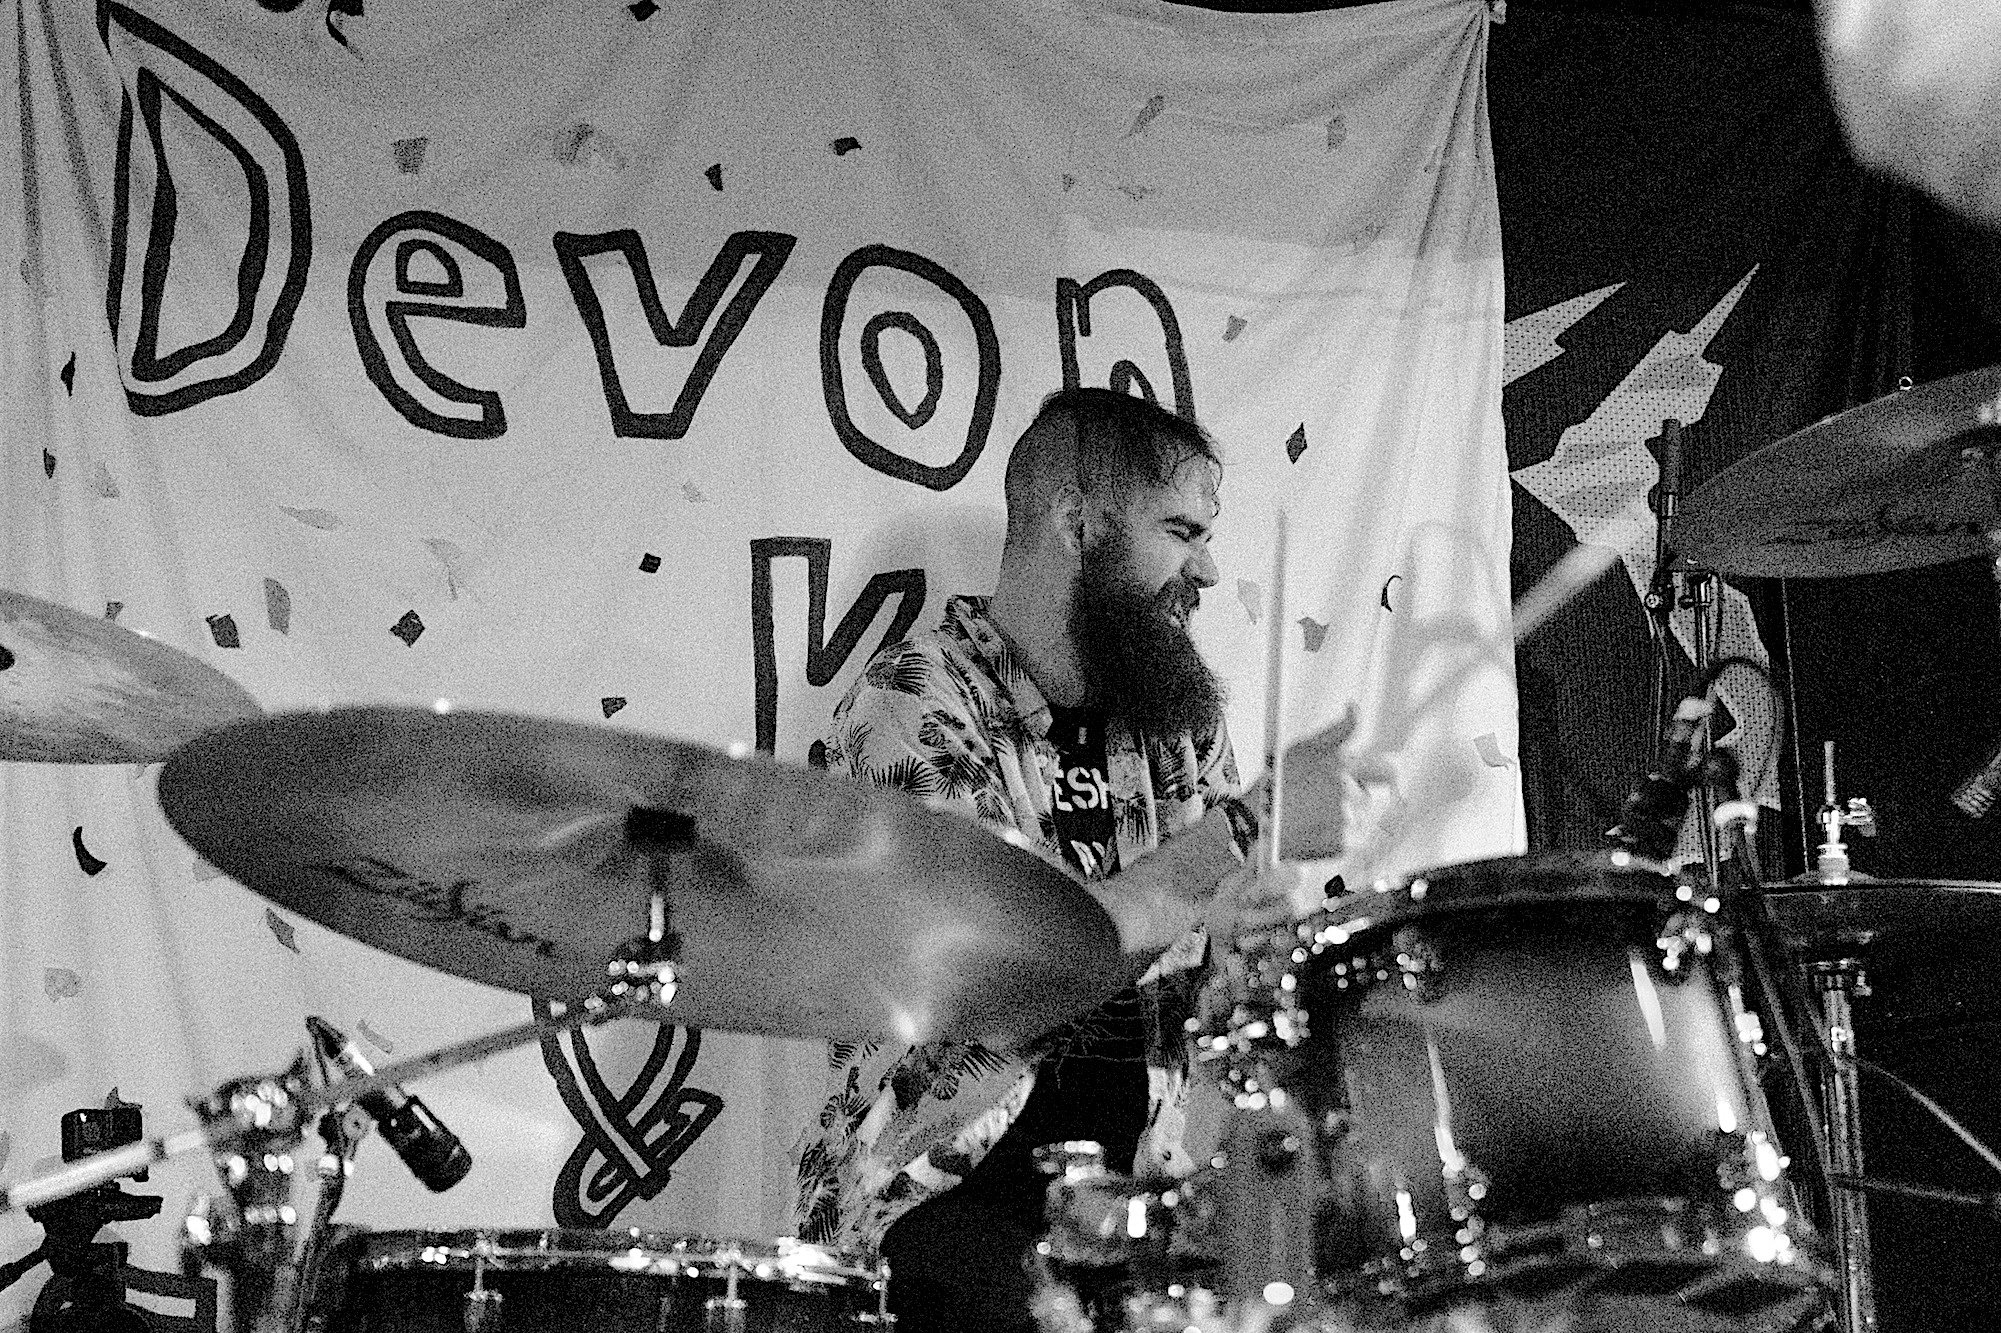 Oh Glorious Nothing  Devon Kay & the Solutions